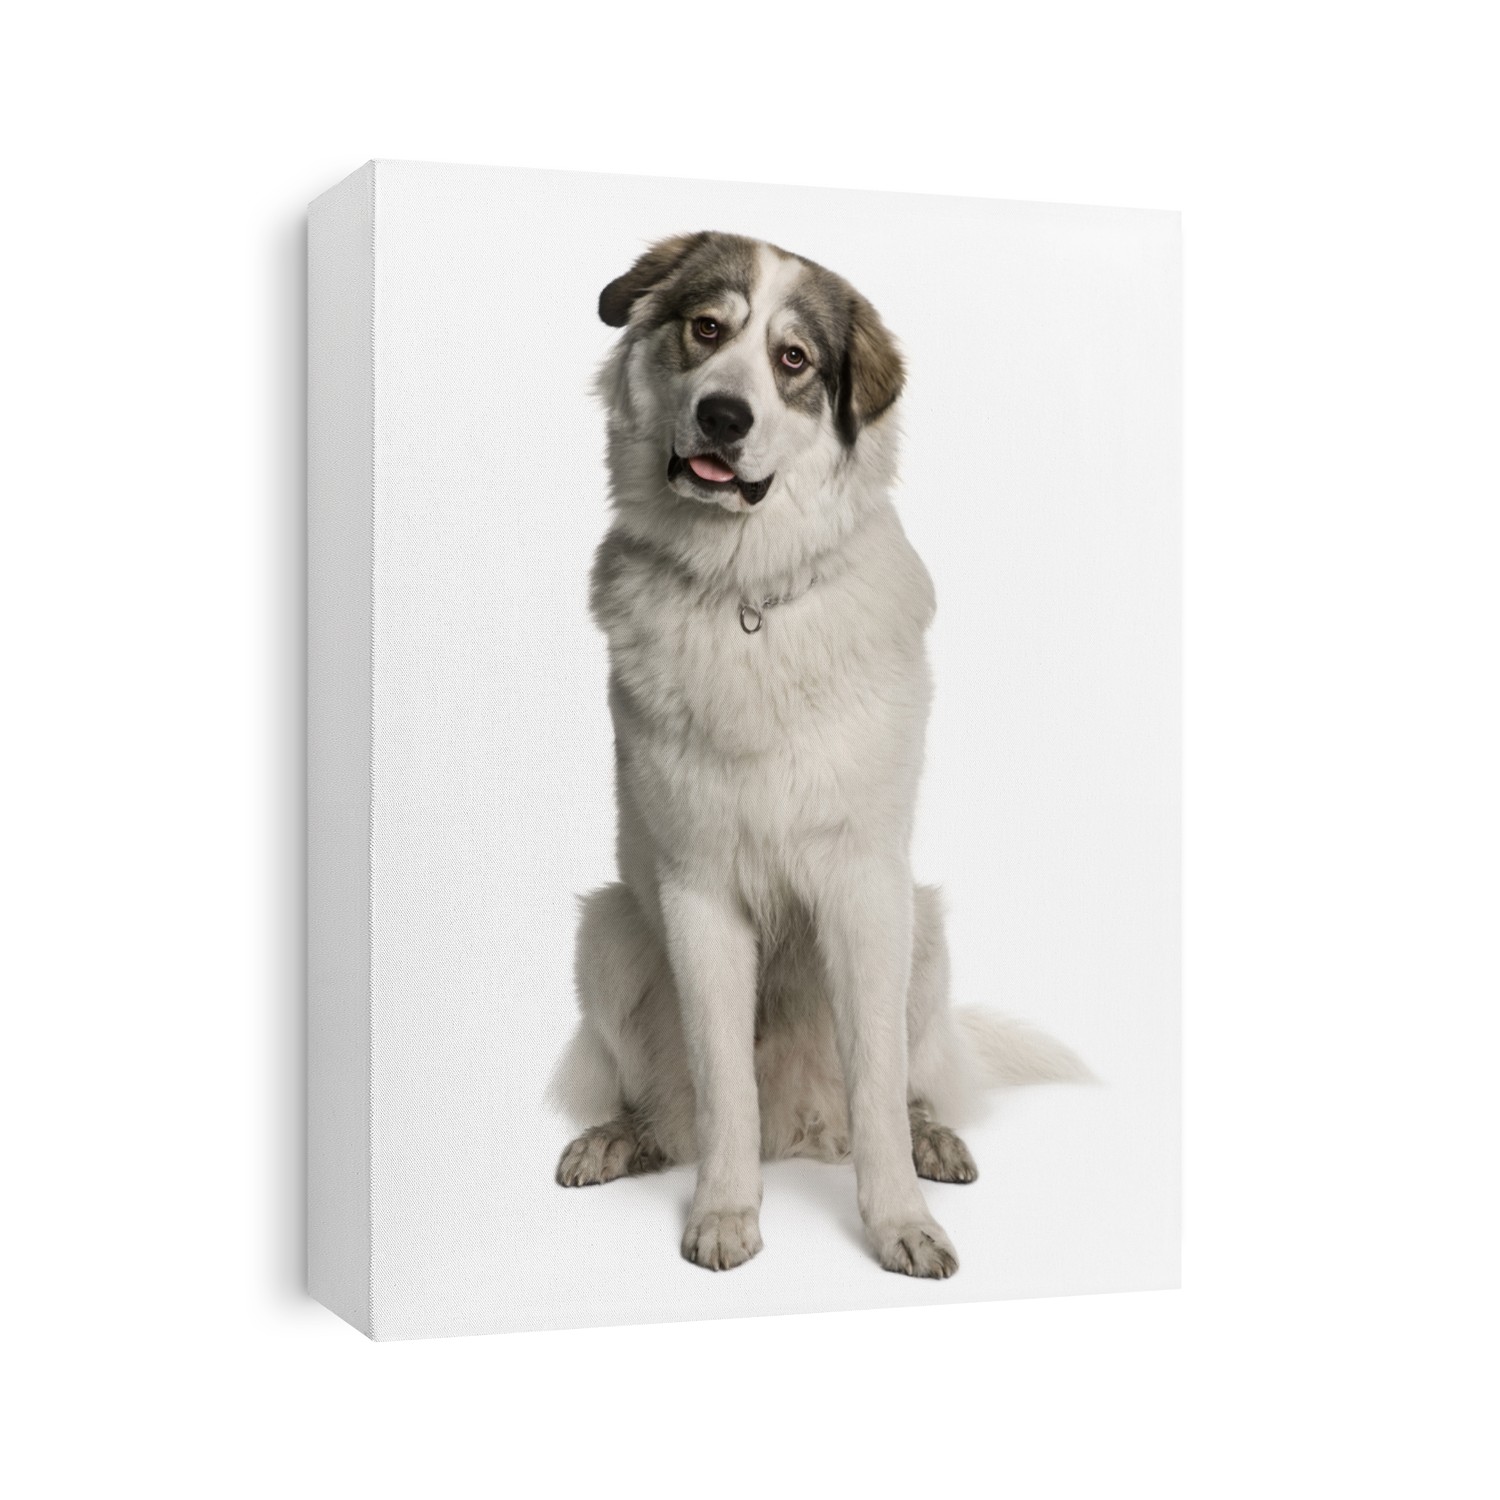 Pyrenean Mountain Dog, known as the Great Pyrenees, 8 months old, sitting in front of white background